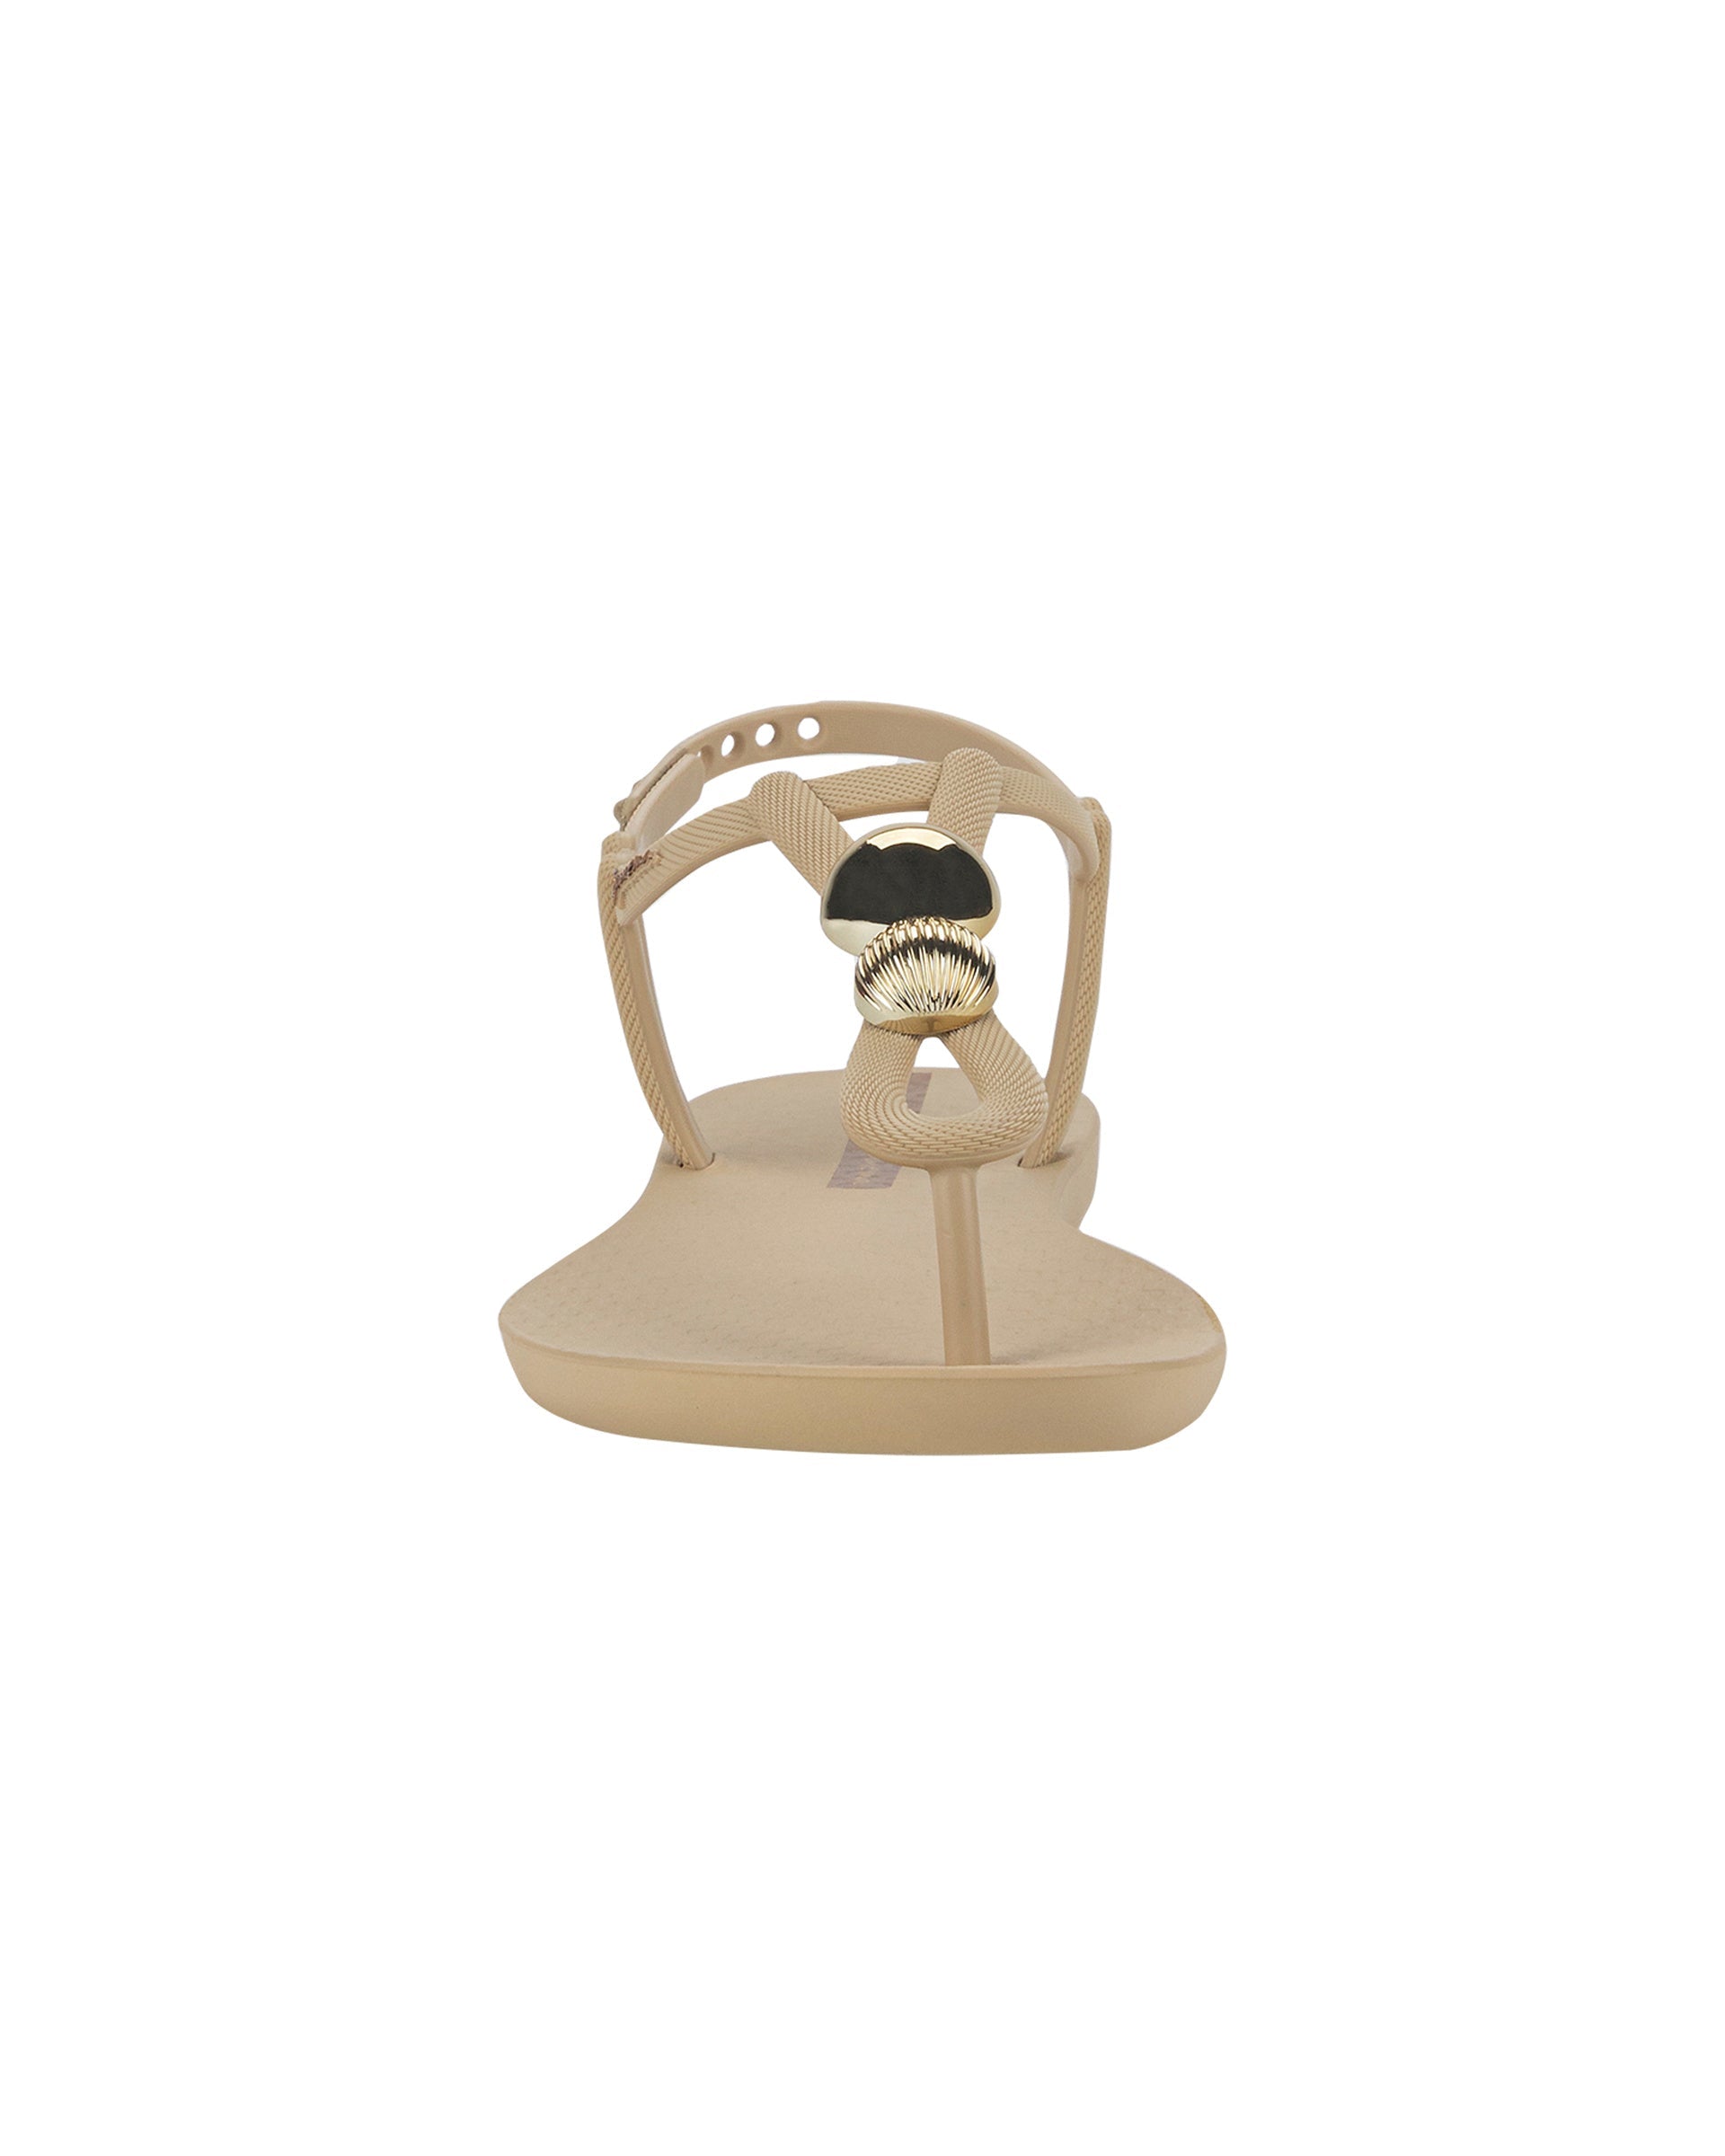 Front view of a beige Ipanema Class Spheres women's t-strap sandal with metallic bauble.